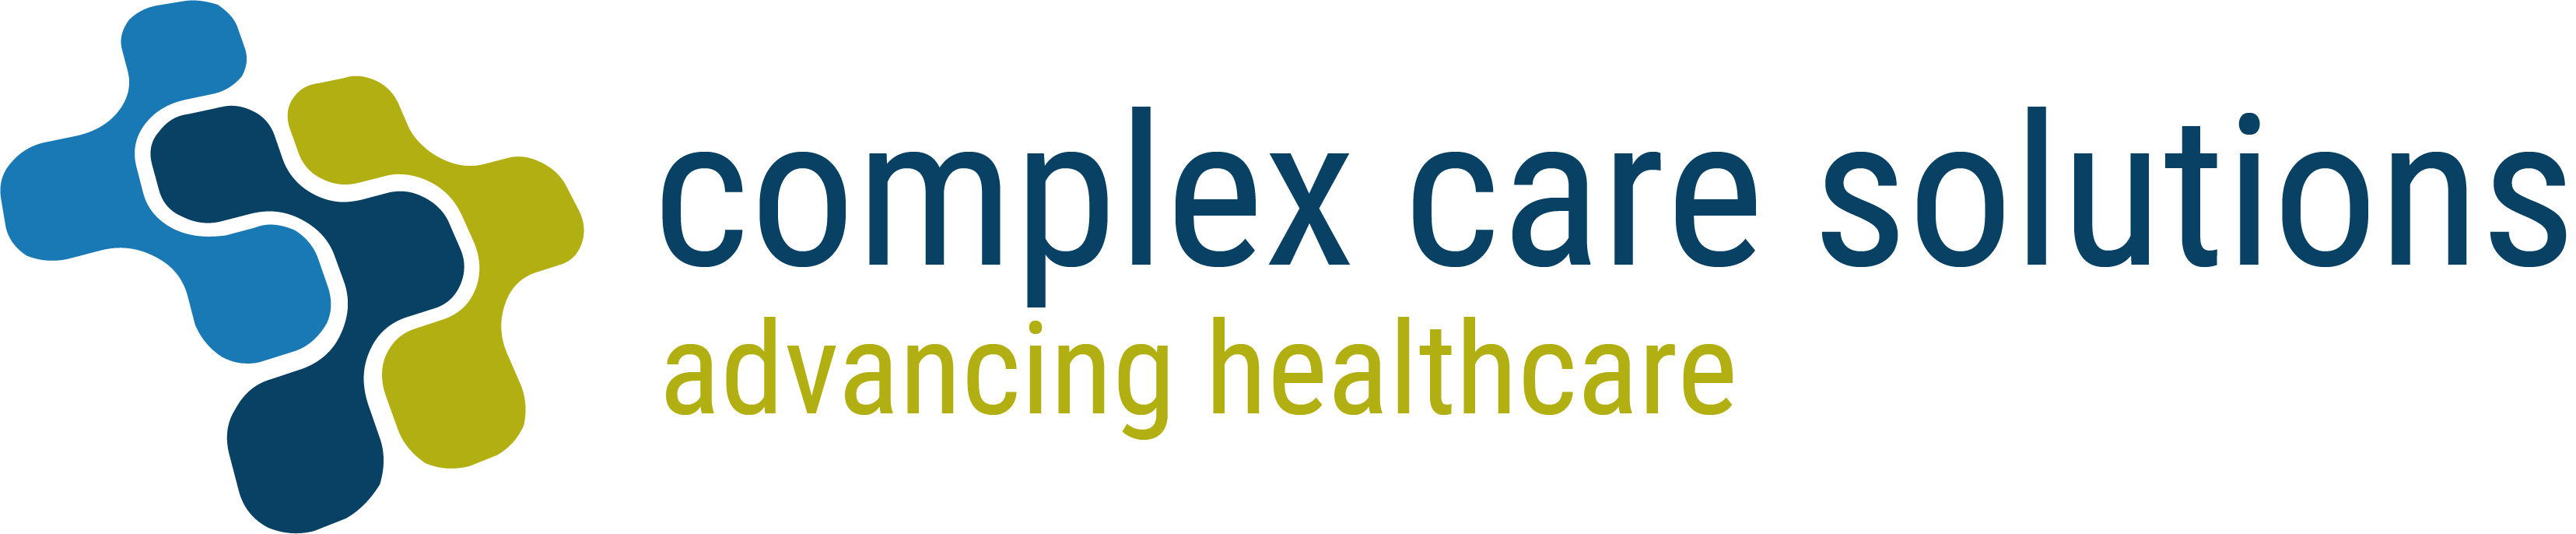 Complex care solutions